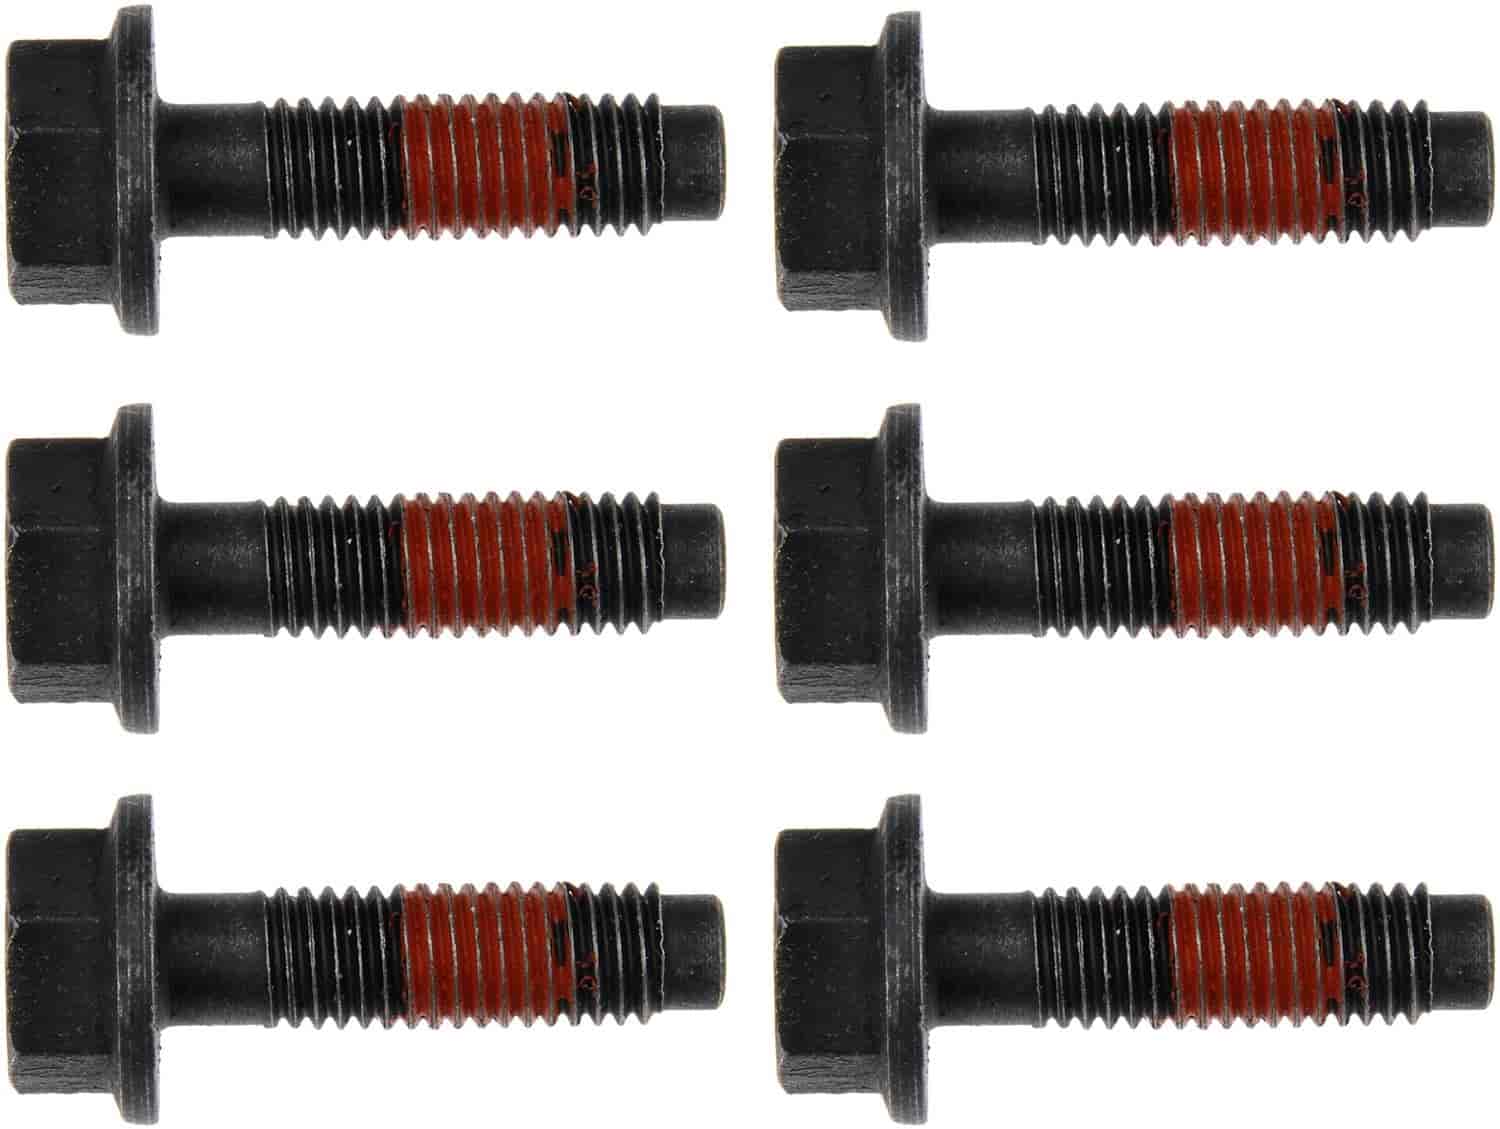 Exhaust Manifold Bolts Fit Select 2003-2019 GM & 2003-2016 Isuzu Models [Set of 6 - Packaged on Card]